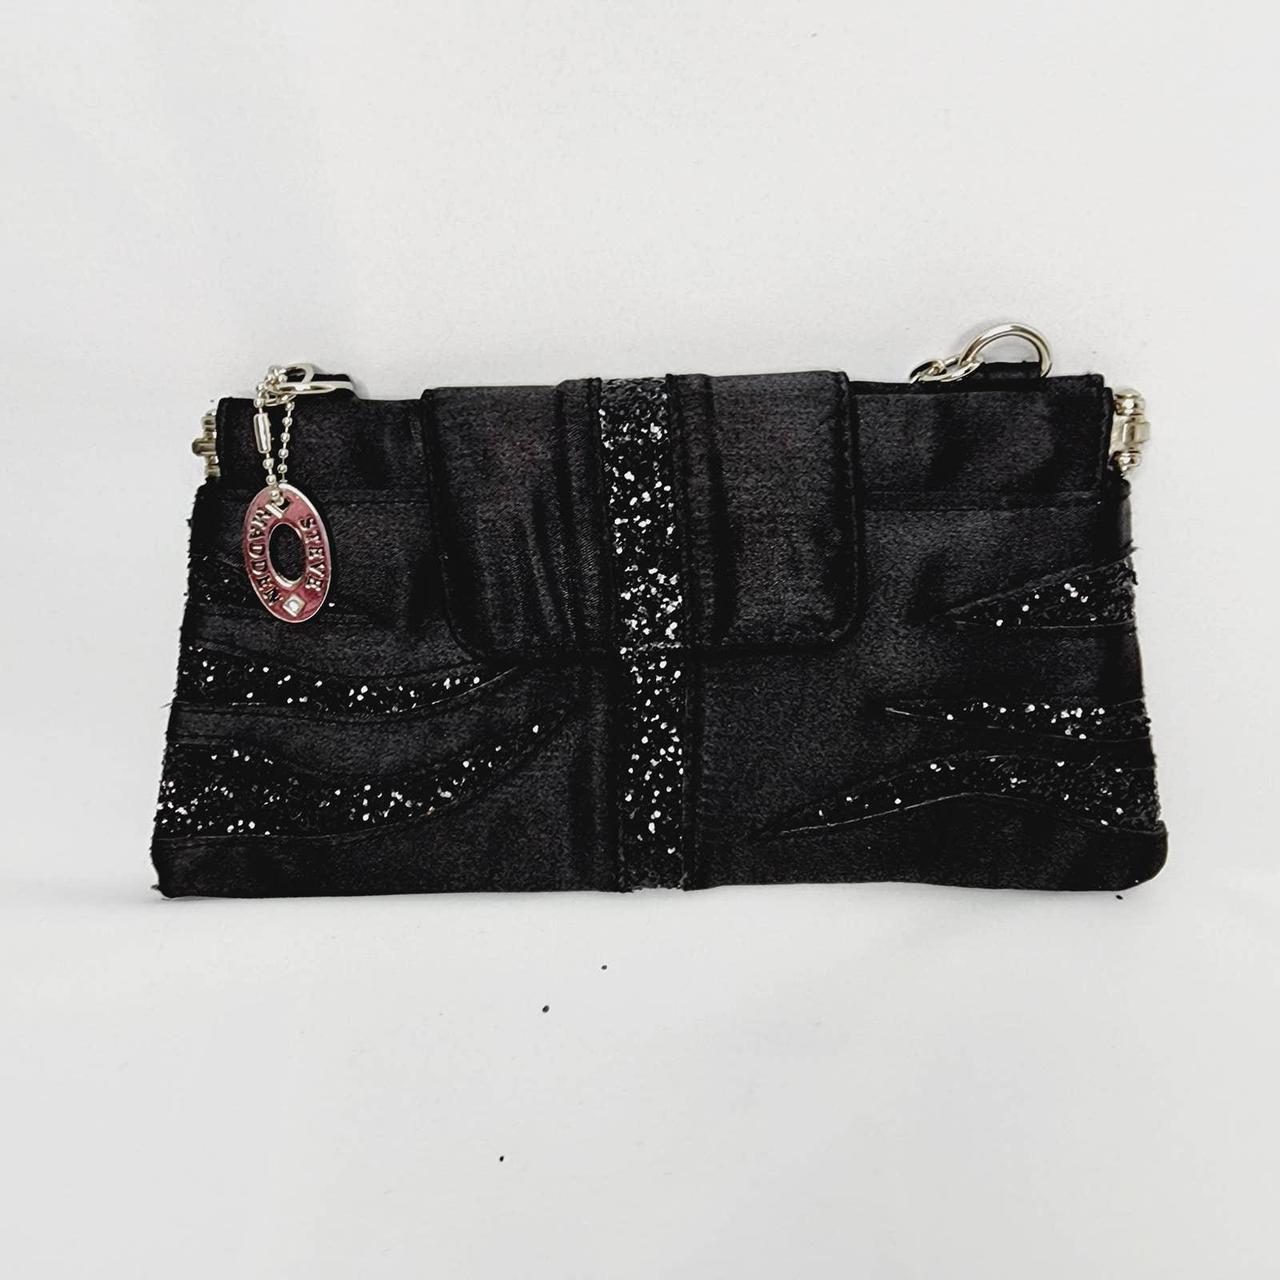 Metallic purse/clutch bag shoulder strap can be hidden magnetic closure  Blue - $19 - From Meacy